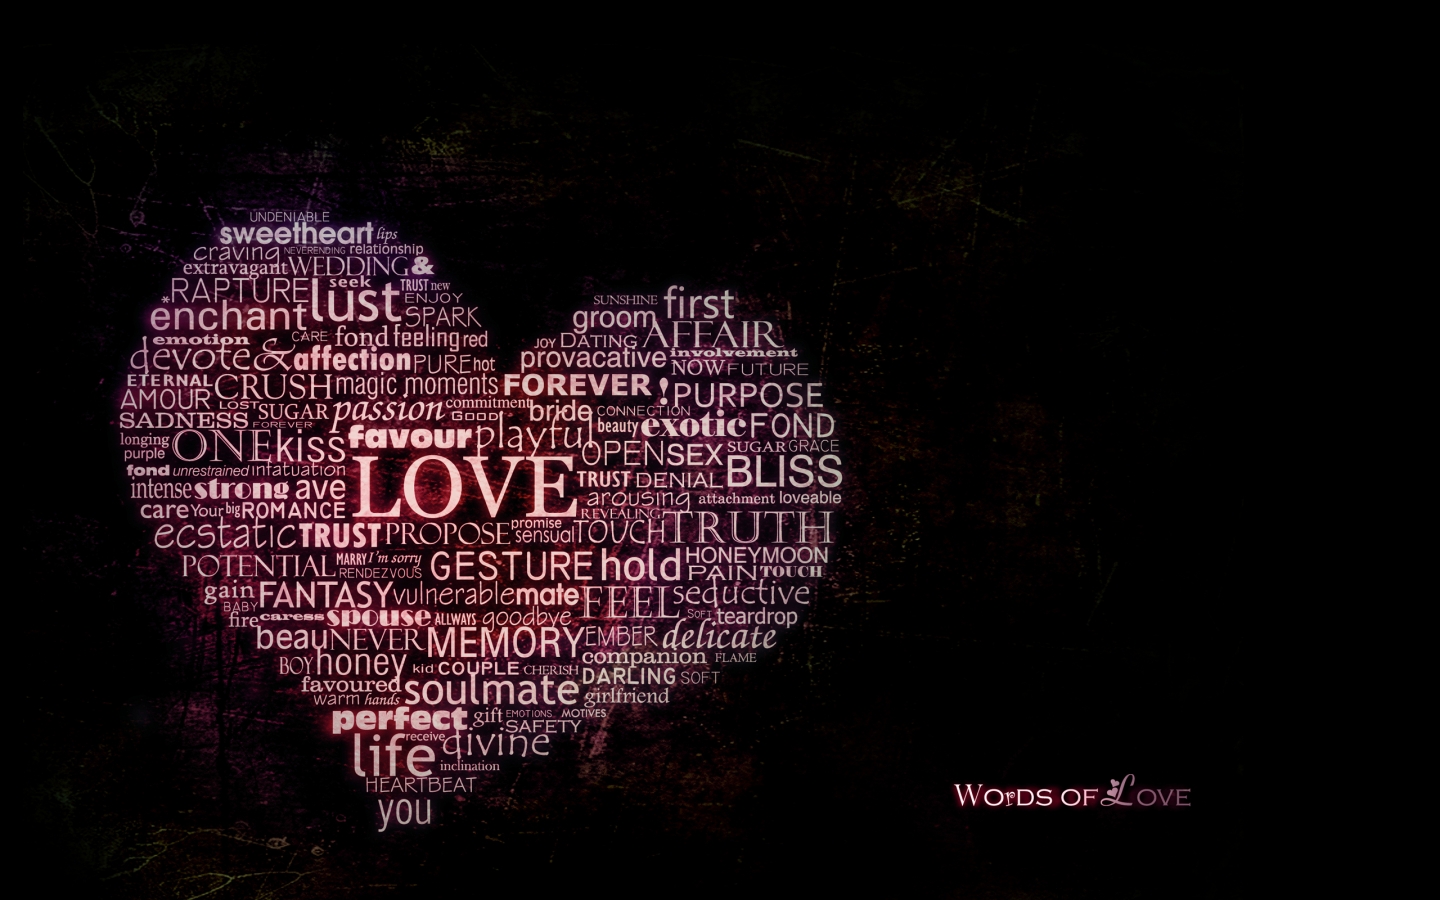 Words of Love for 1440 x 900 widescreen resolution